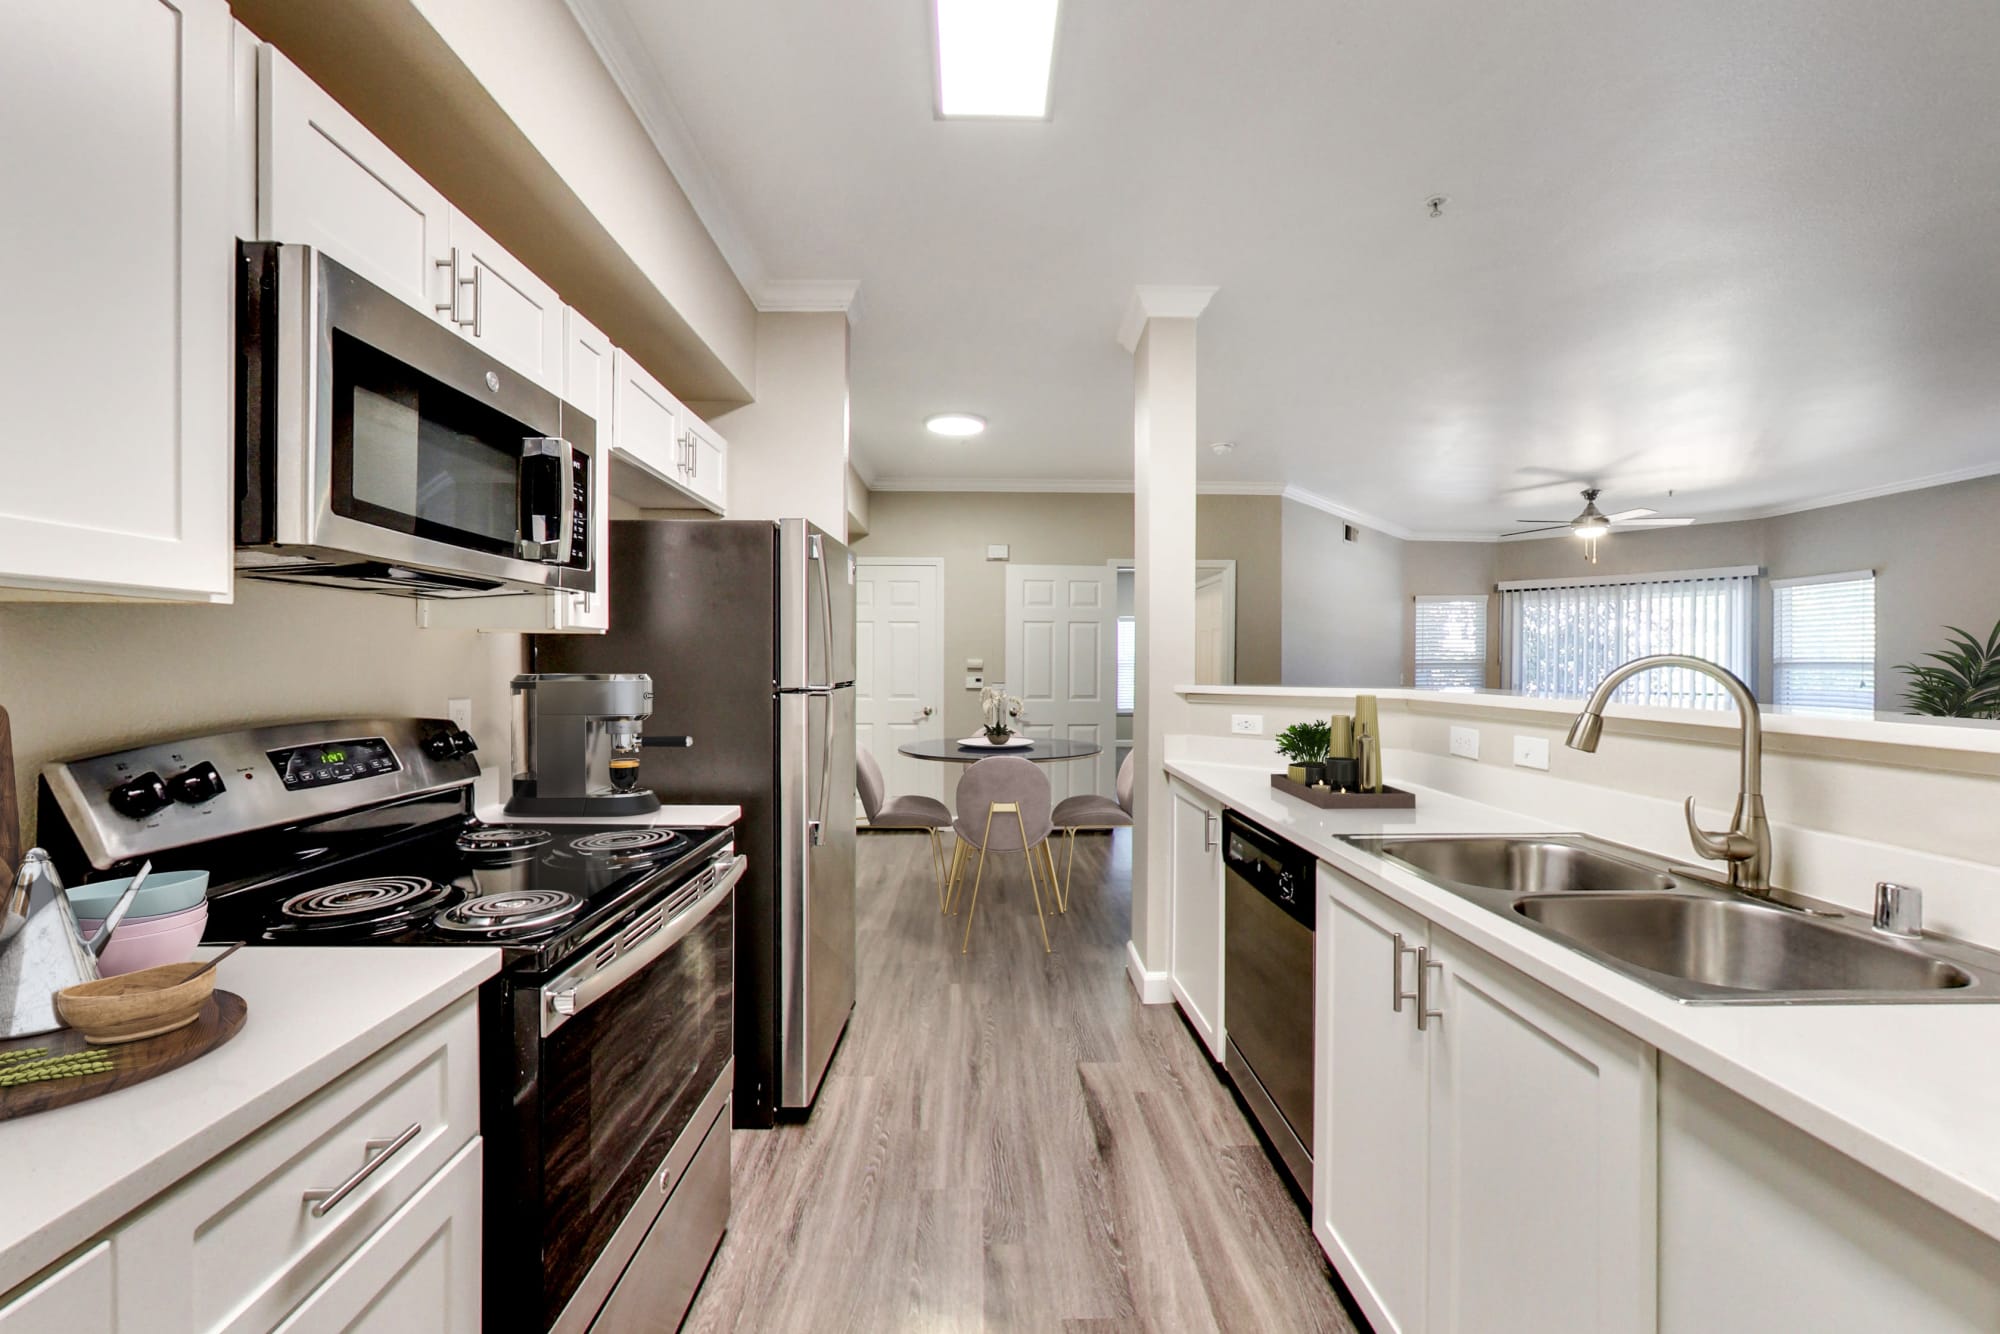 A modern apartment kitchen with white cabinetry at Avion Apartments in Rancho Cordova, California